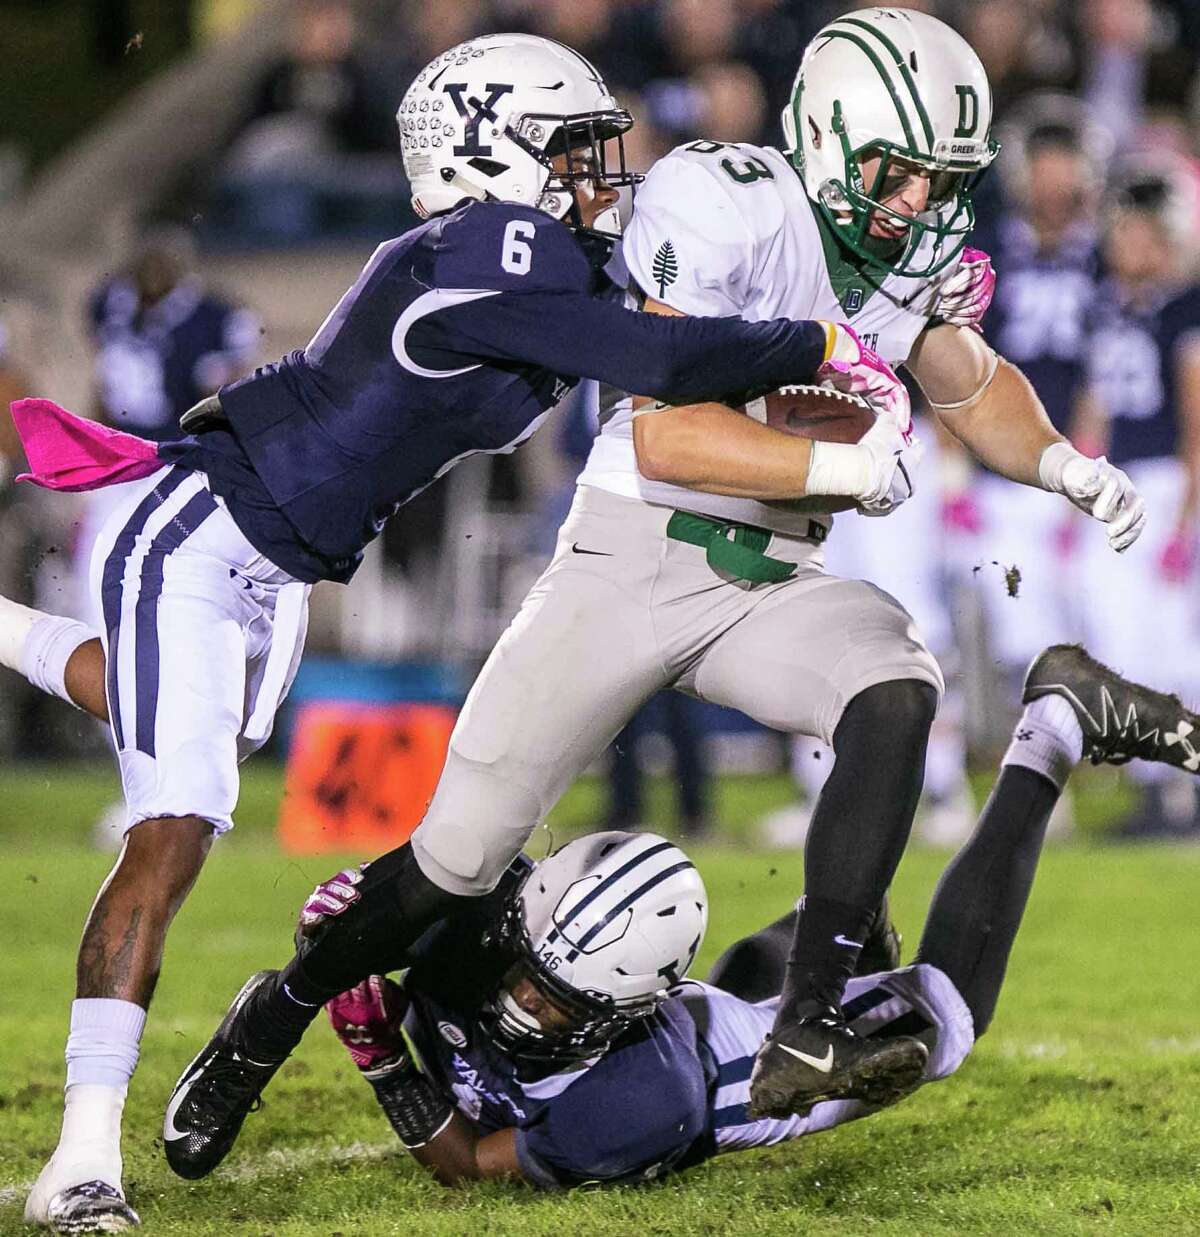 (John Vanacore/For Hearst Connecticut Media) The Yale Bulldogs hosted the Big Green of Dartmouth under the lights at Yale Bowl Friday, October 5, 2018.